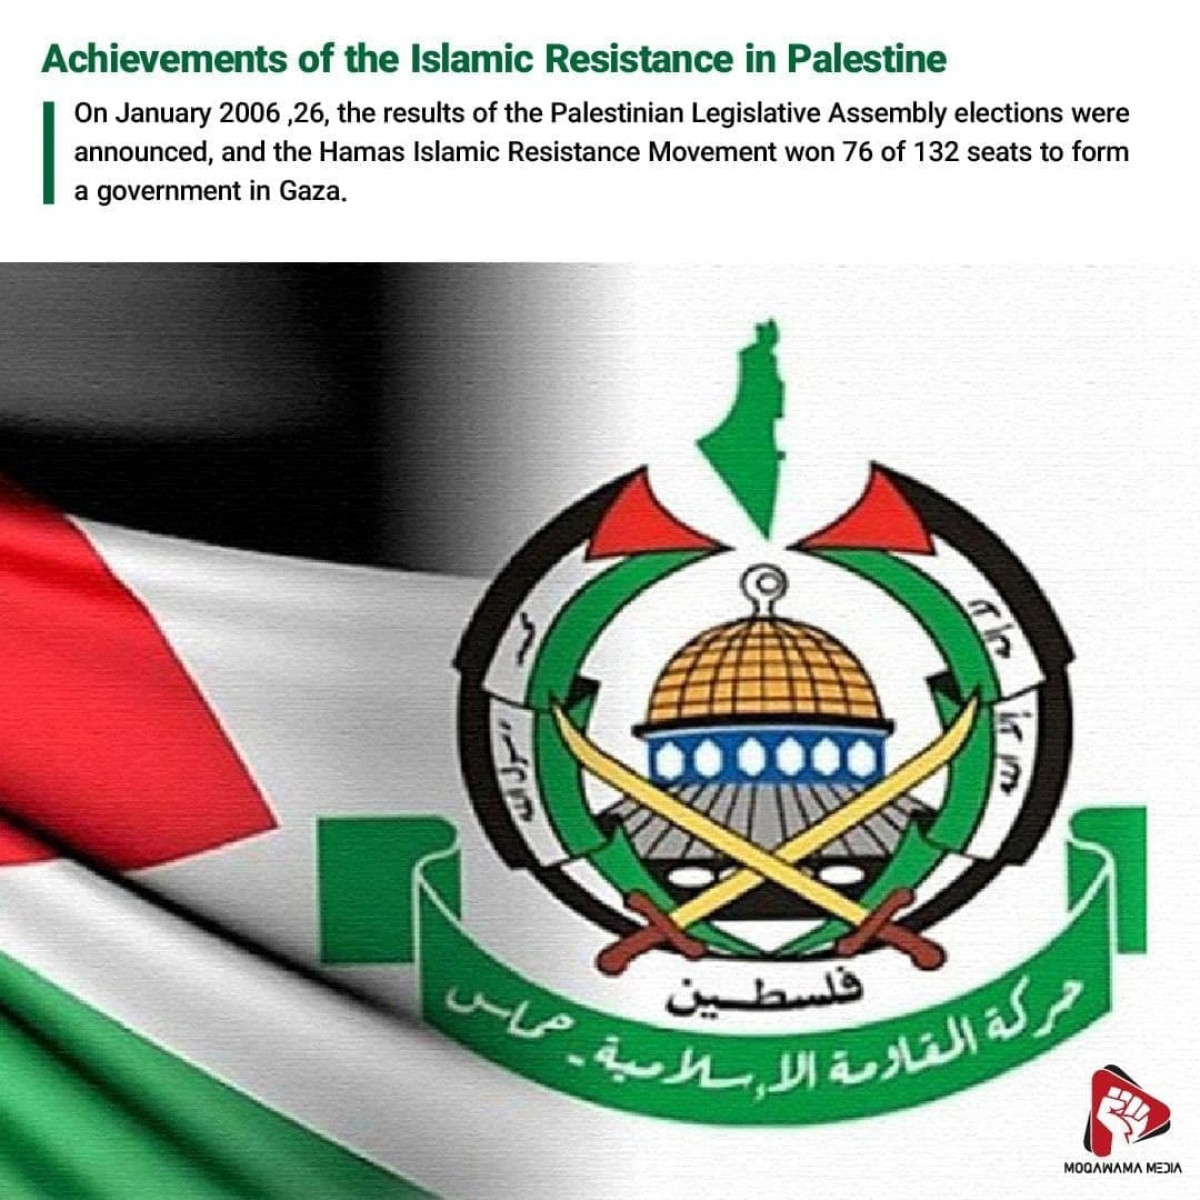 Collection of posters: Achievements of the Islamic Resistance in Palestine